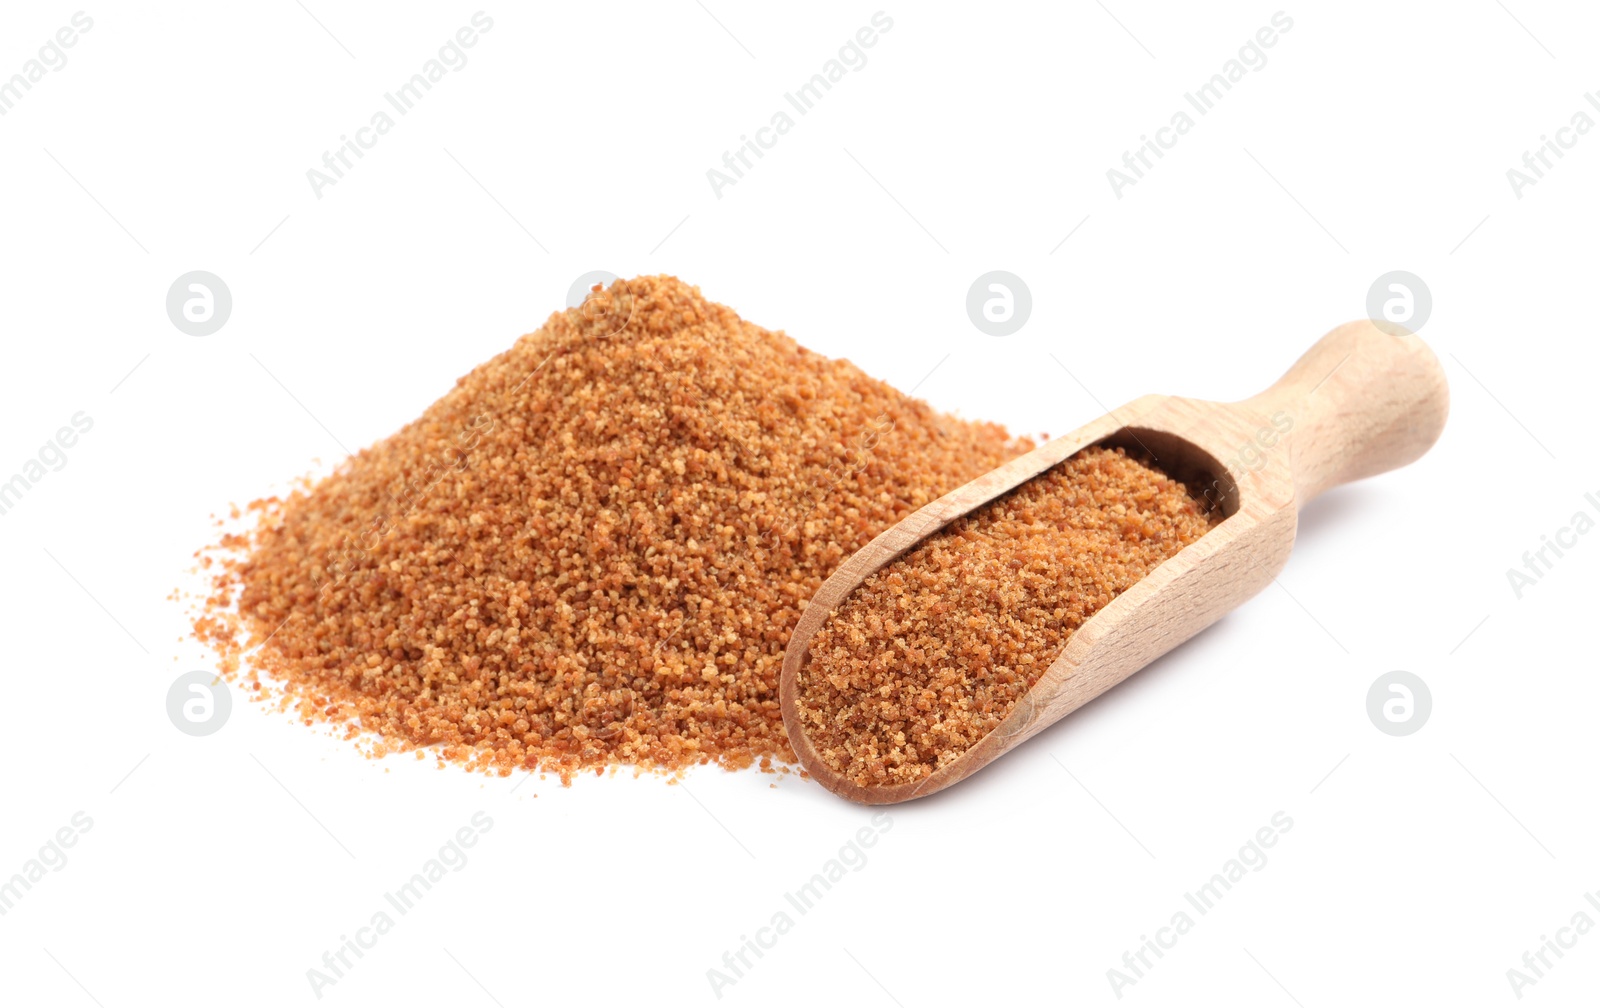 Photo of Natural coconut sugar and wooden scoop on white background